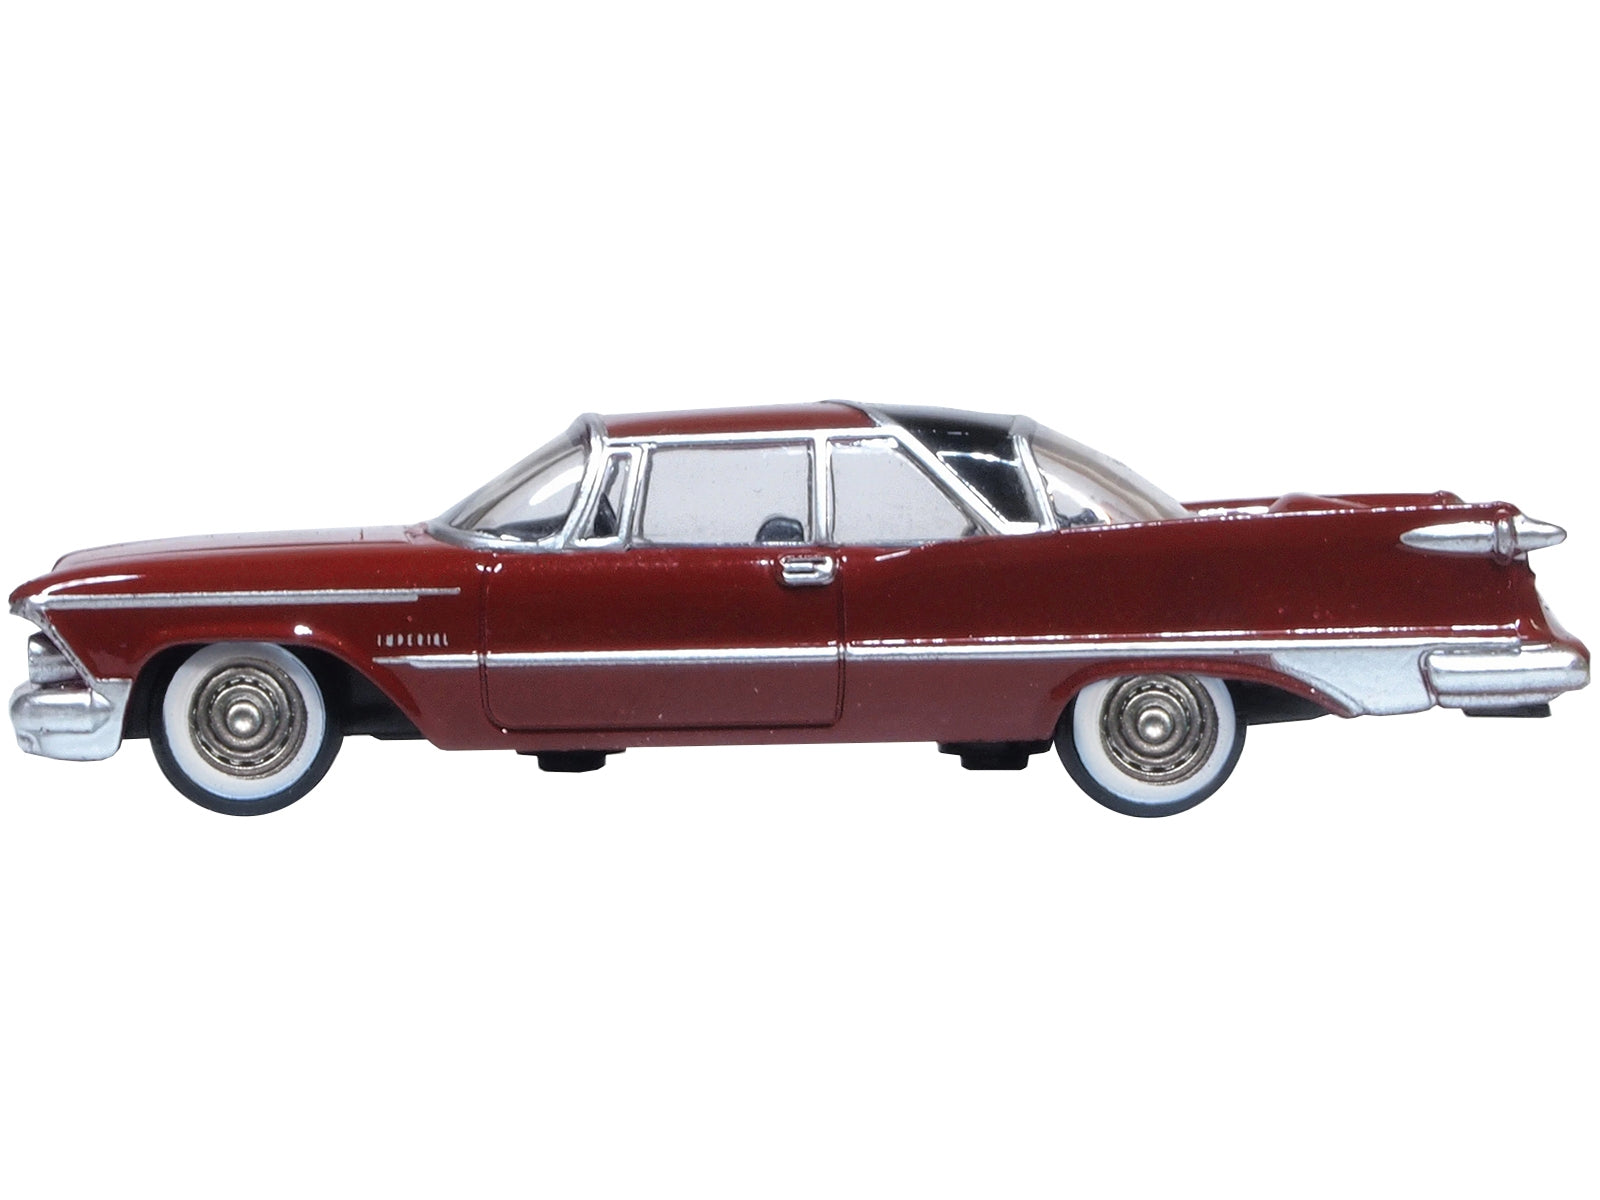 1959 Chrysler Imperial Crown 2 Door Hardtop Radiant Red with Black Top 1/87 (HO) Scale Diecast Model Car by Oxford Diecast